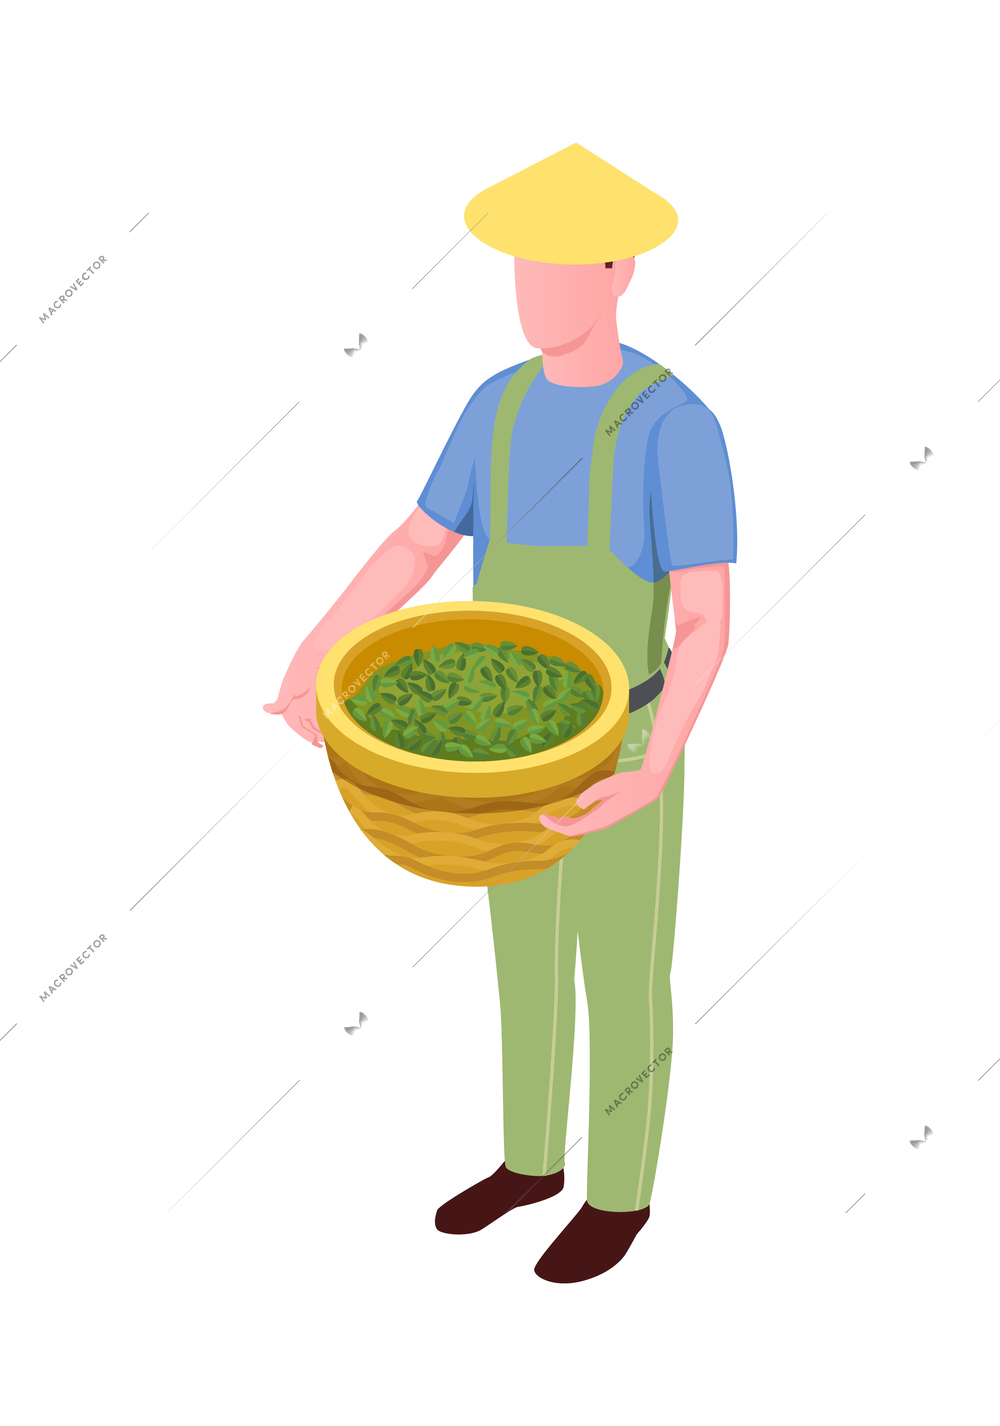 Isometric icon with tea picker holding basket with fresh plucked leaves 3d vector illustration